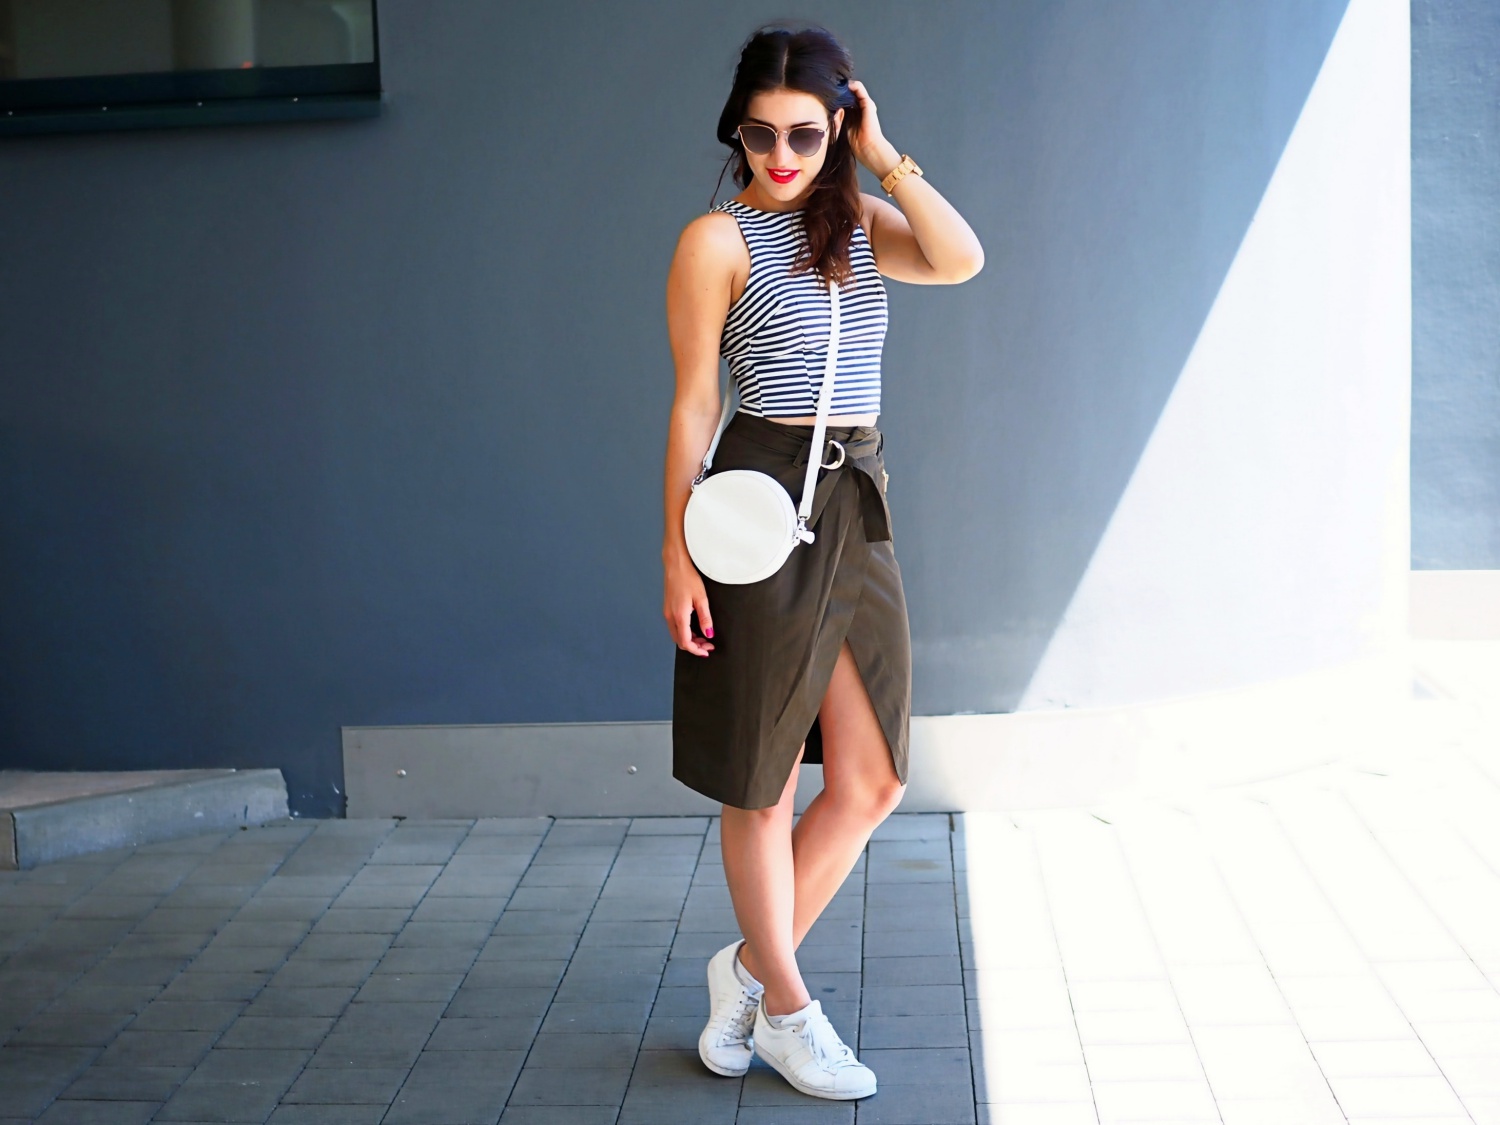 asos-utility-skirt-summer-streetstyle-crop-cropped-shirt-top-stripes-monki-bag-quay-all-my-love-copper-mirrored-shades-fashion-style-details